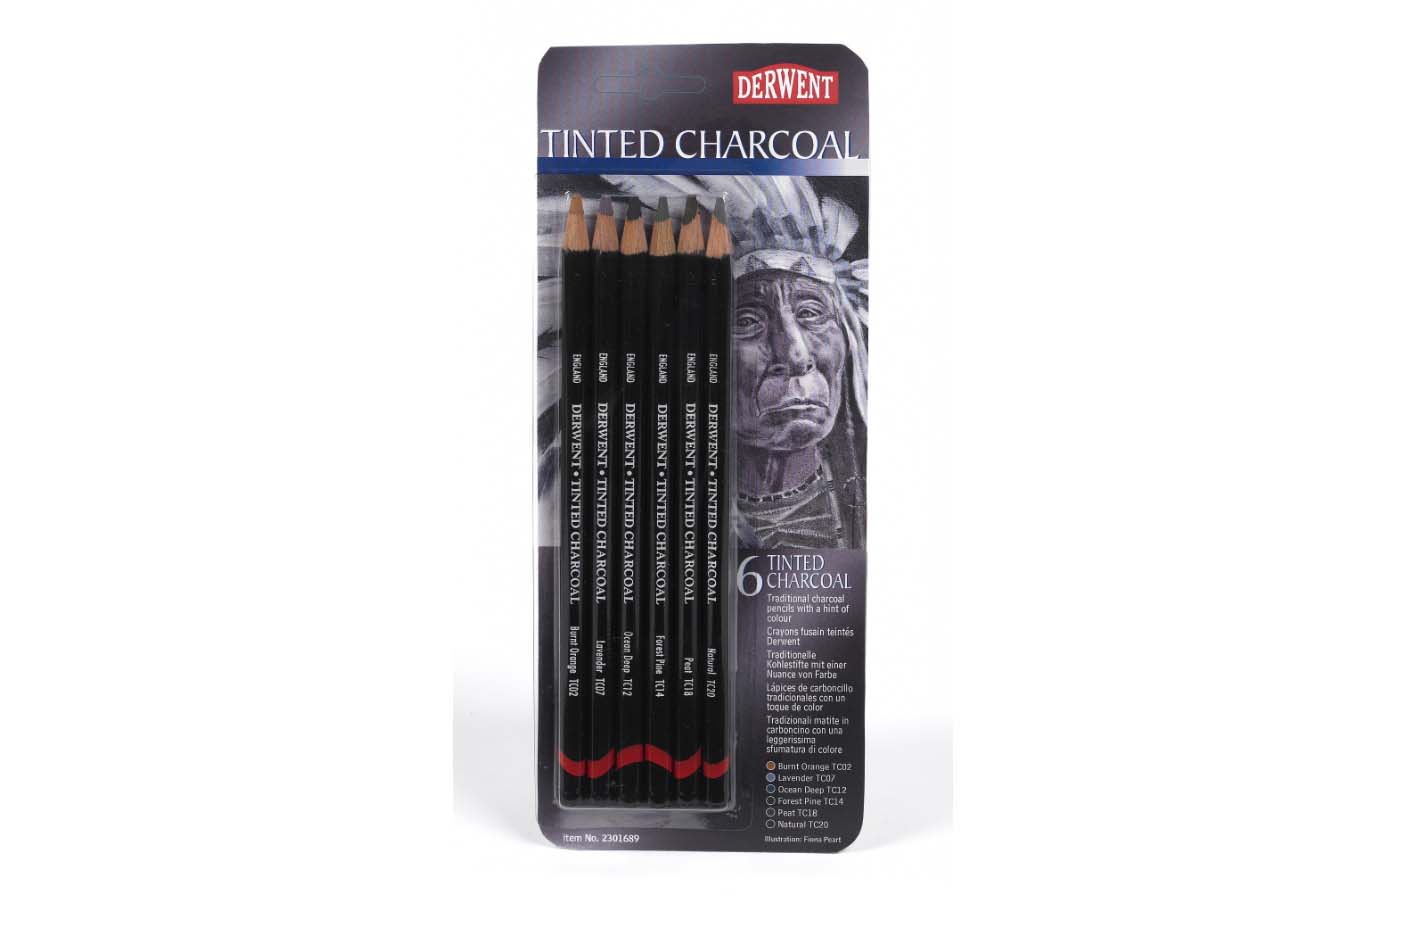 Derwent Charcoal Set Blister Pack of Mixed Charcoal Media 